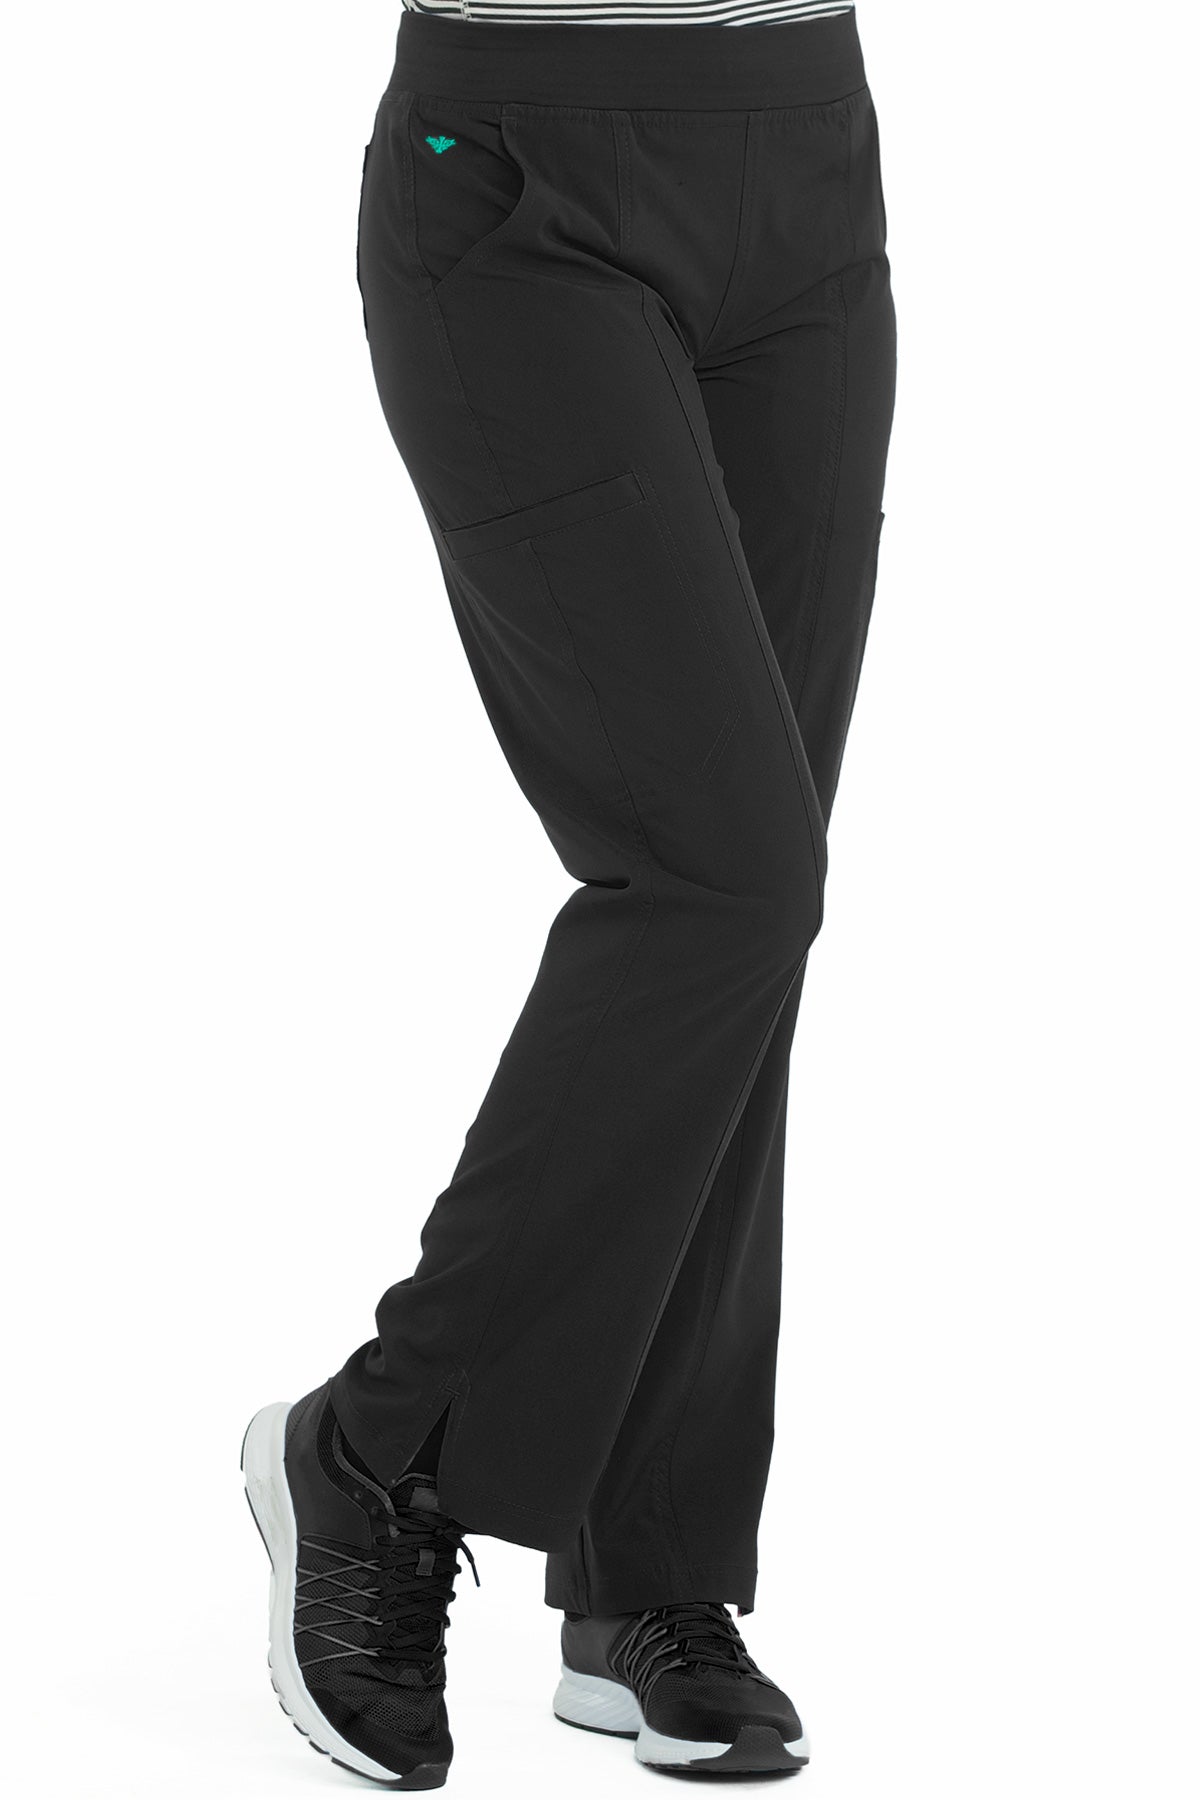 Yoga 2 Cargo Pocket Pant by Med Couture (Petite) XS-5XL / Black